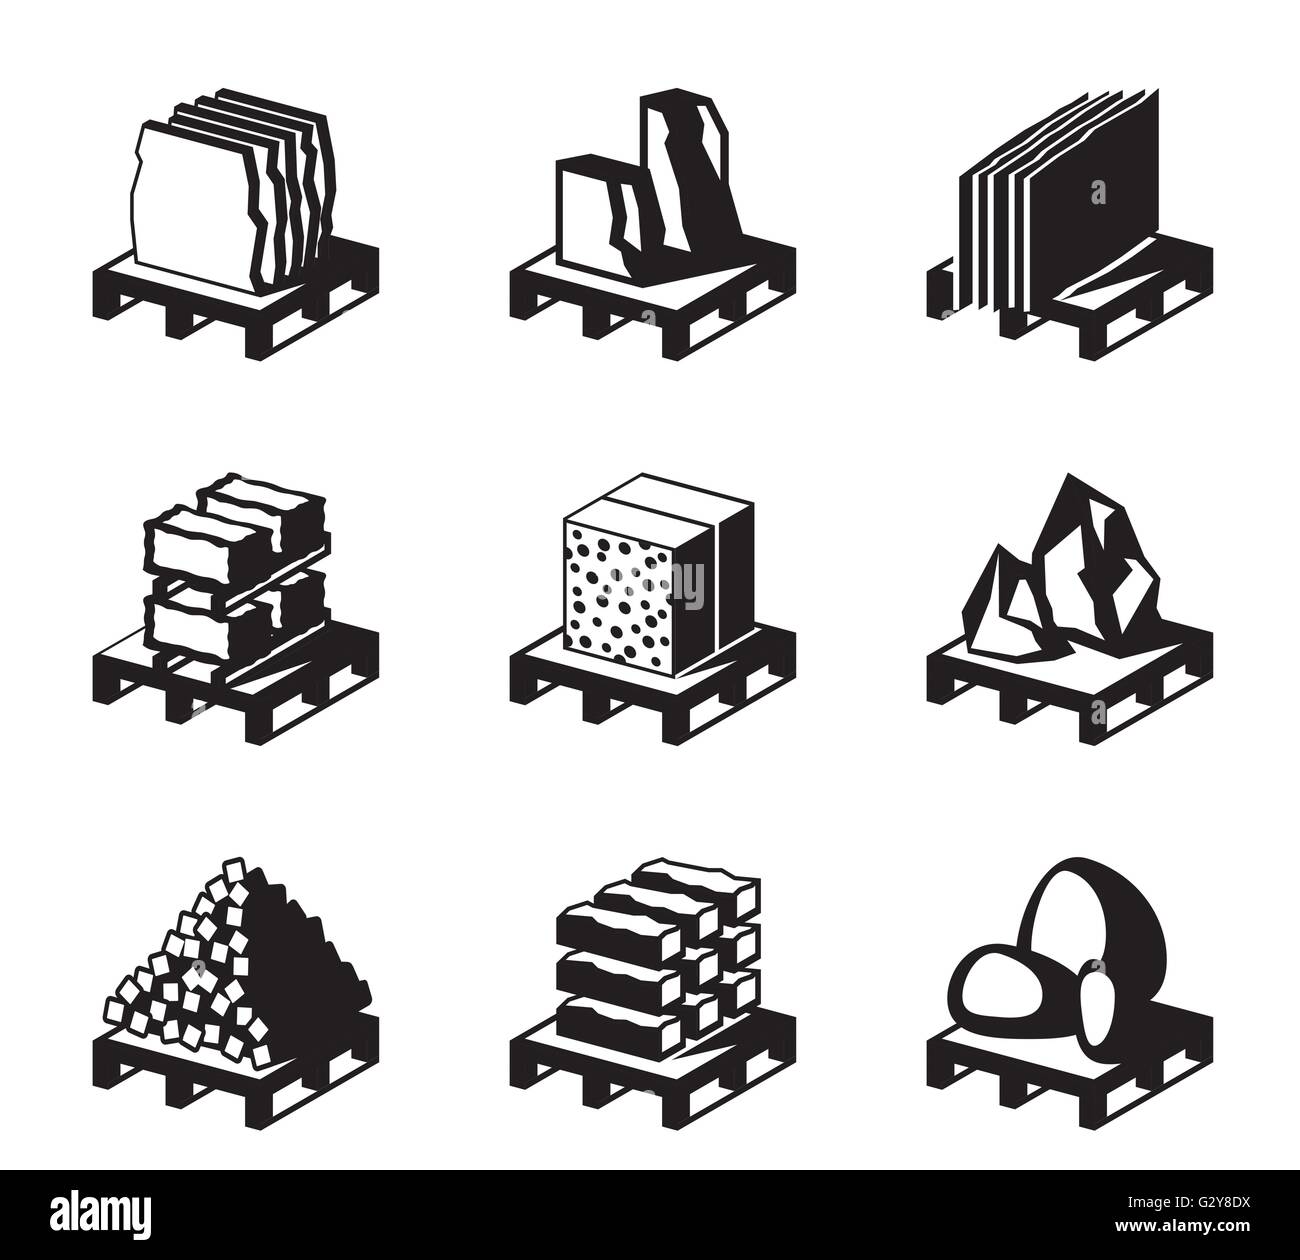 Various construction and building materials - vector illustration Stock Vector